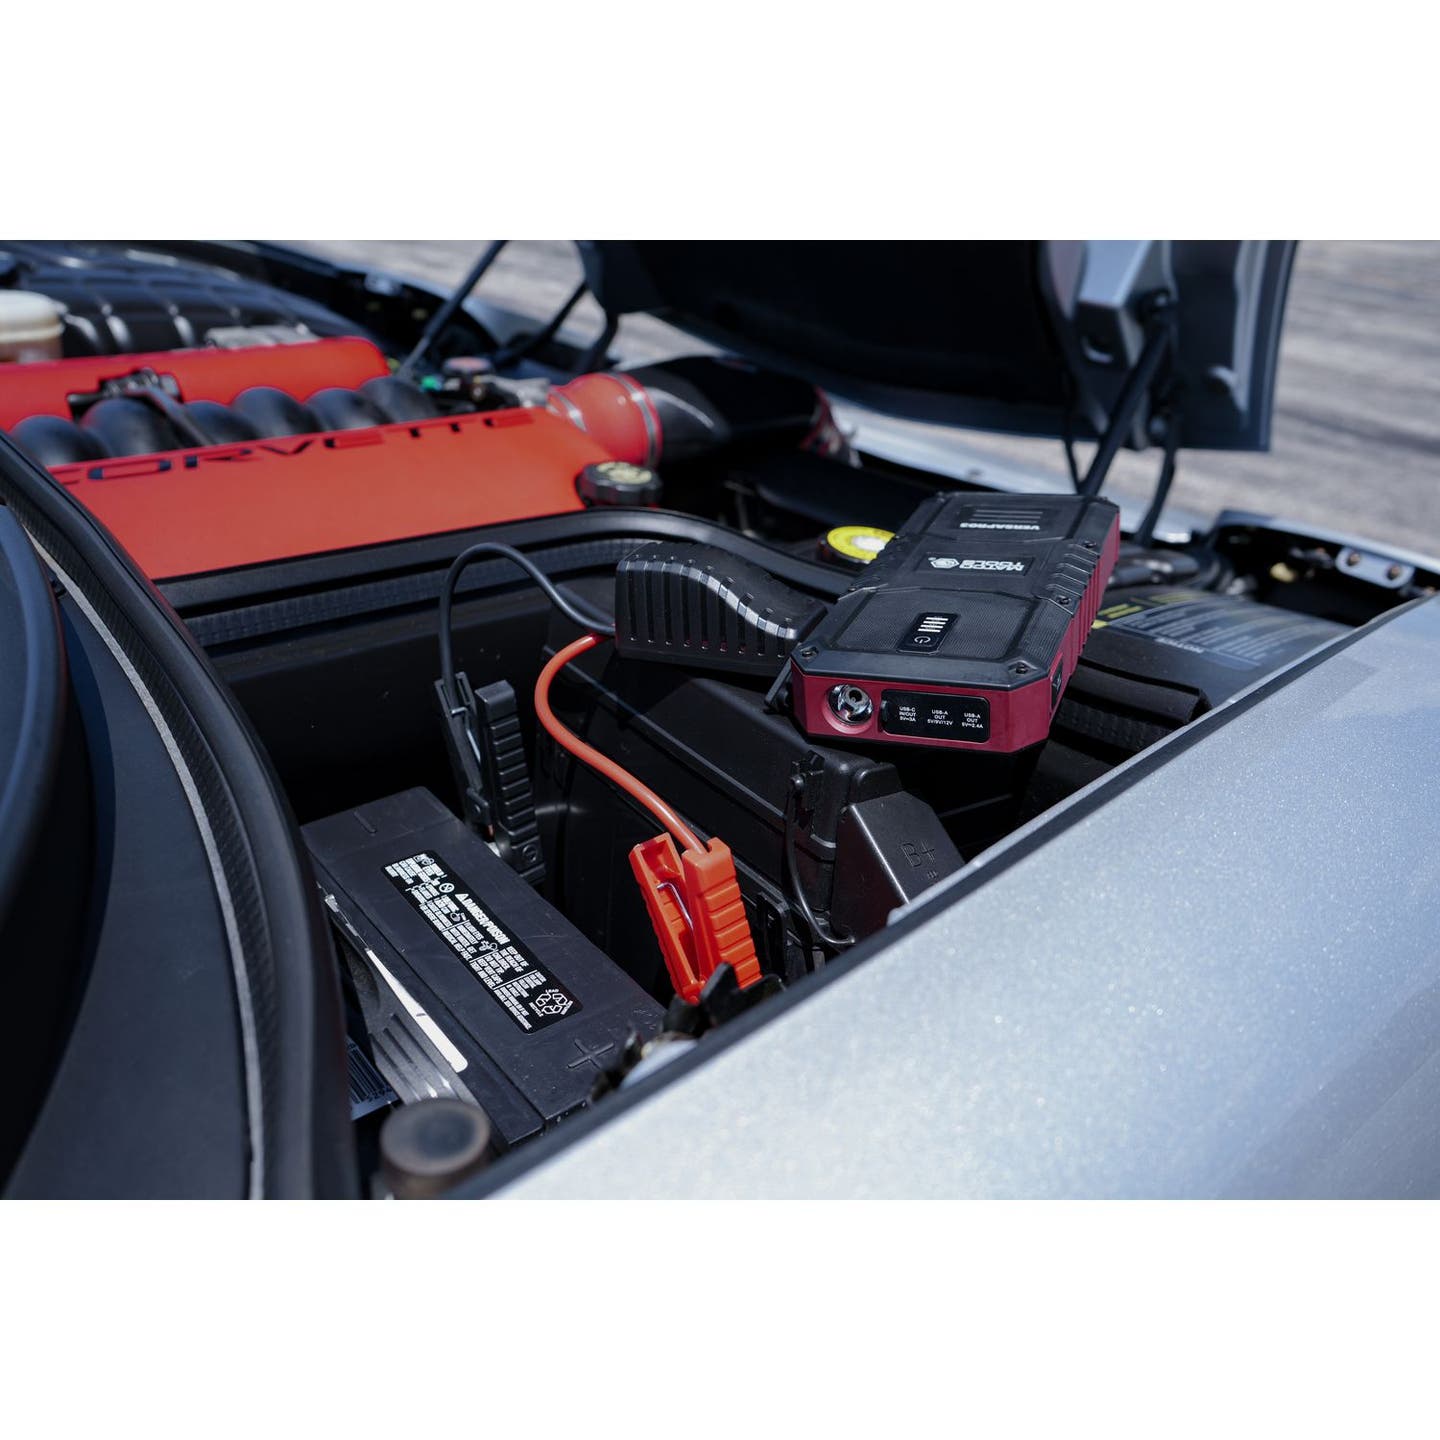 3,000 AMP PORTABLE POWER SOURCE WITH JUMP START FUNCTION